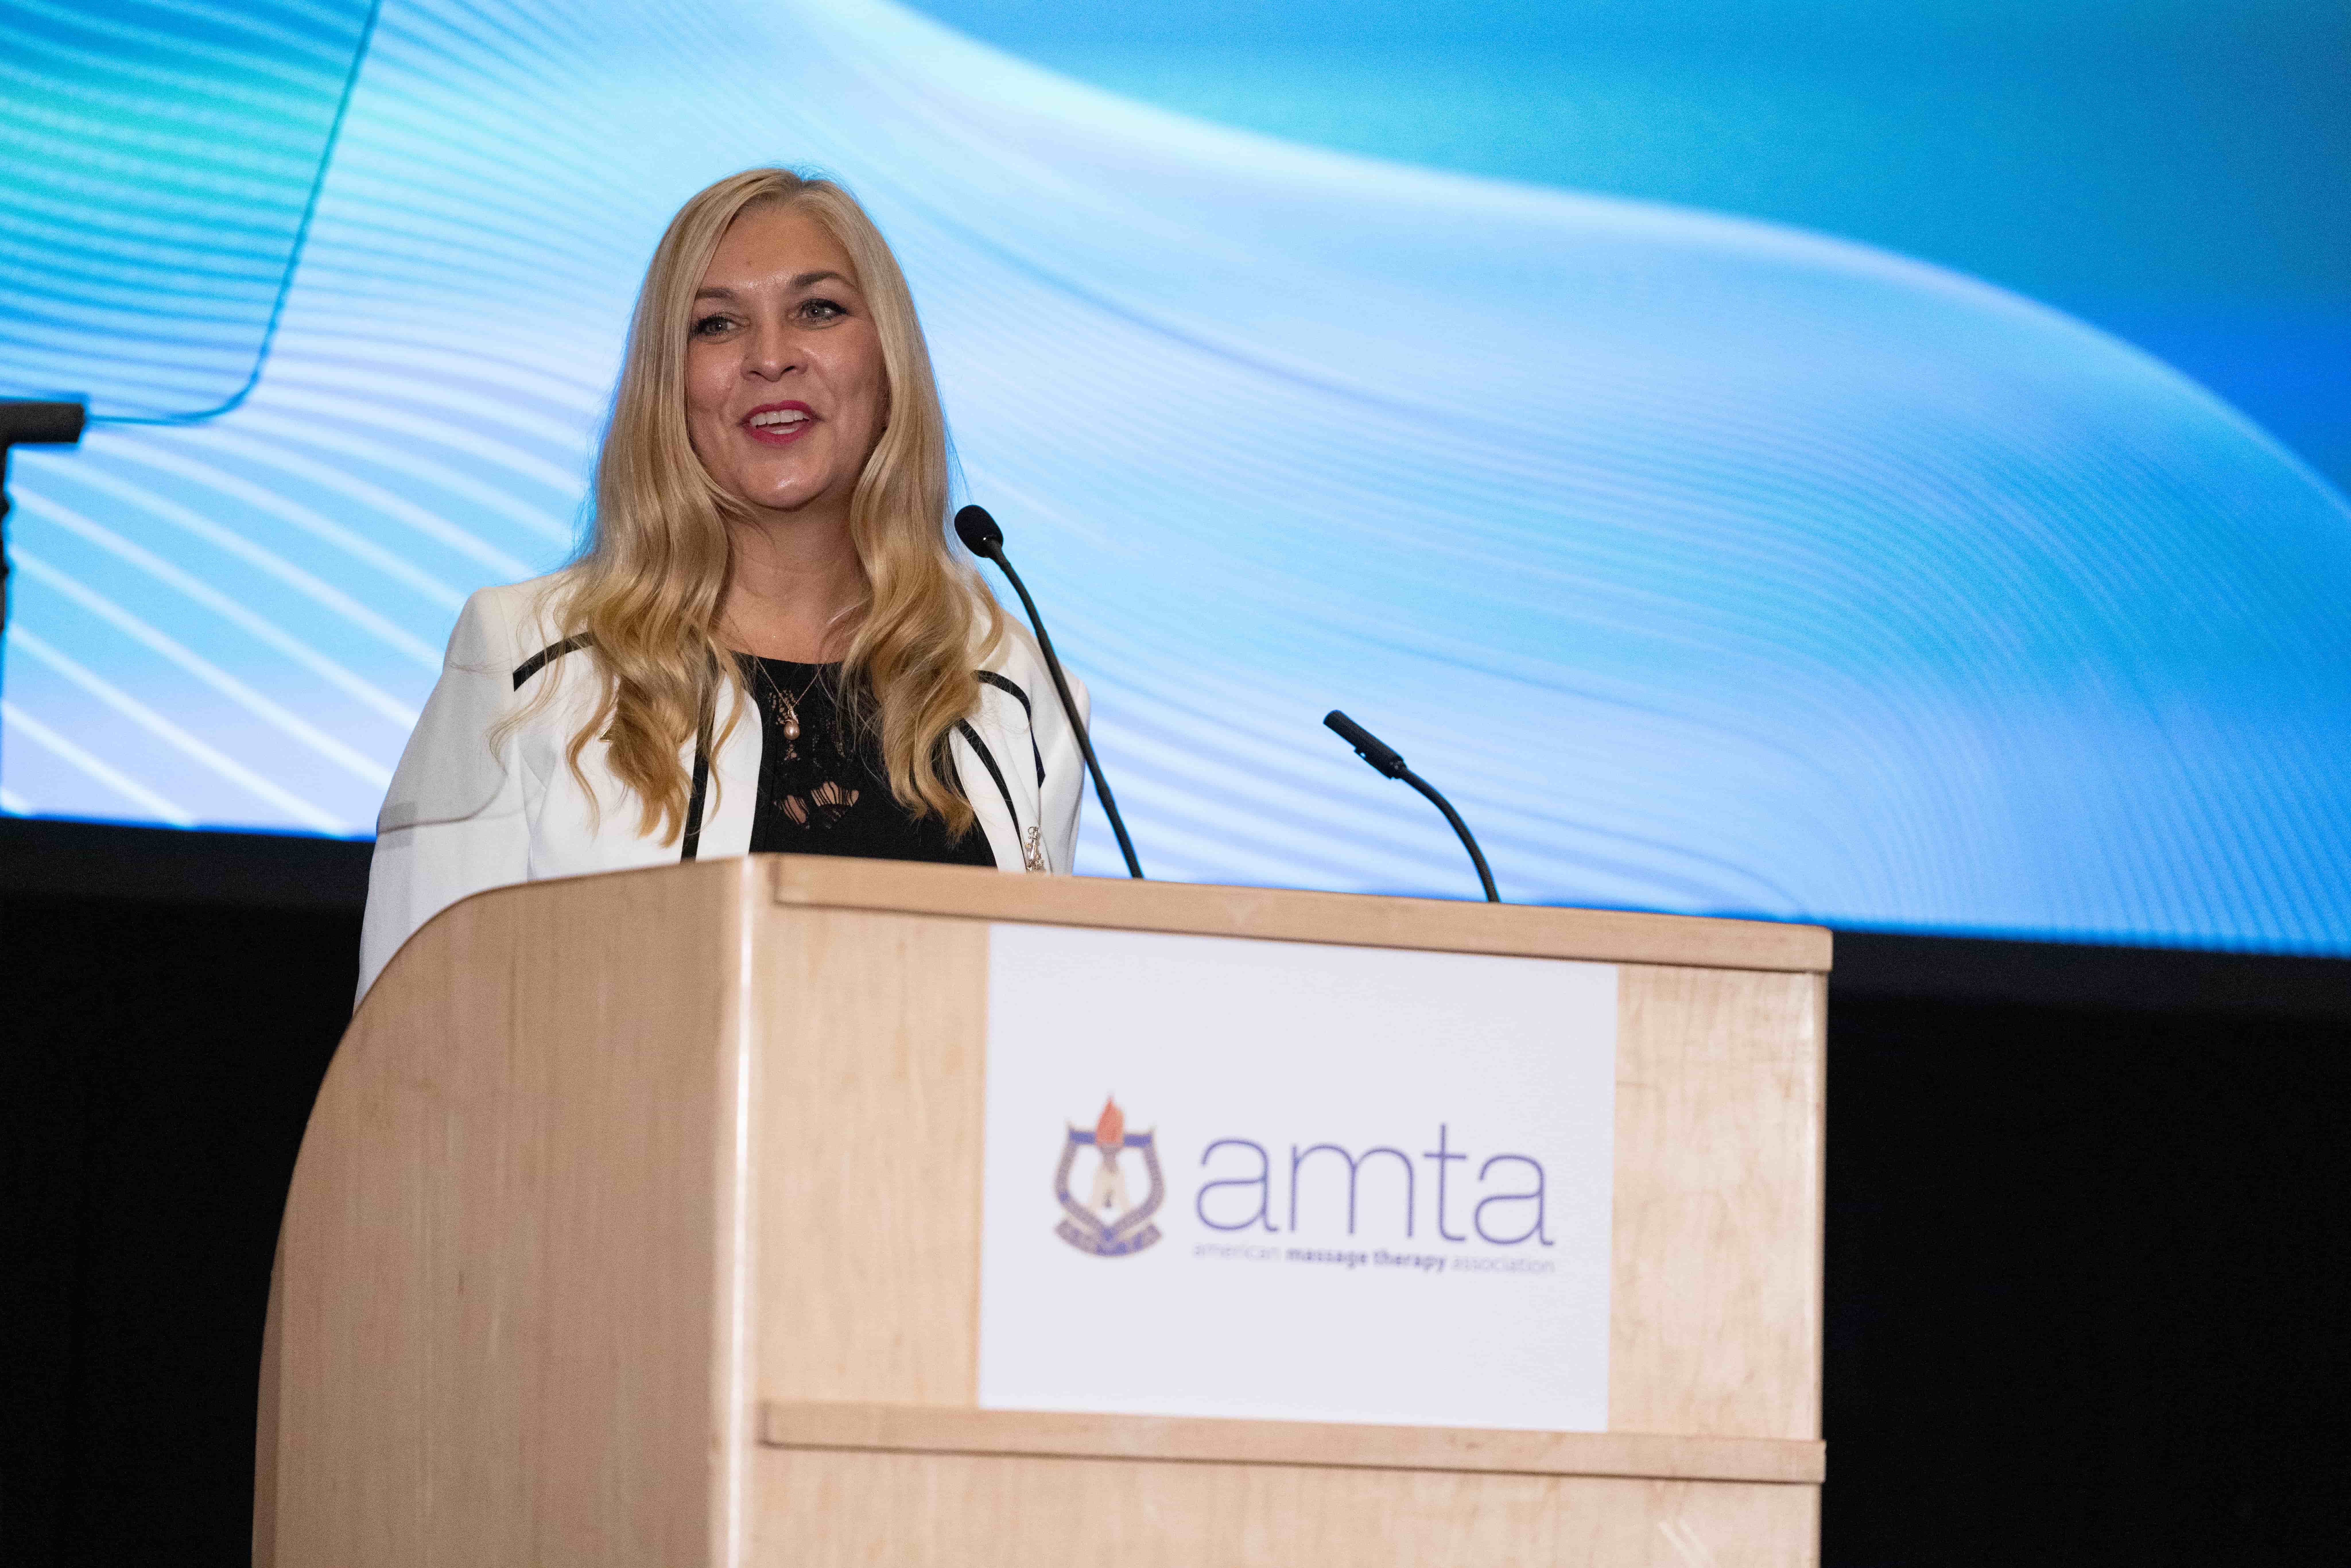 AMTA President Michaele Colizza welcomes attendees back together for AMTA’s 2022 National Convention.